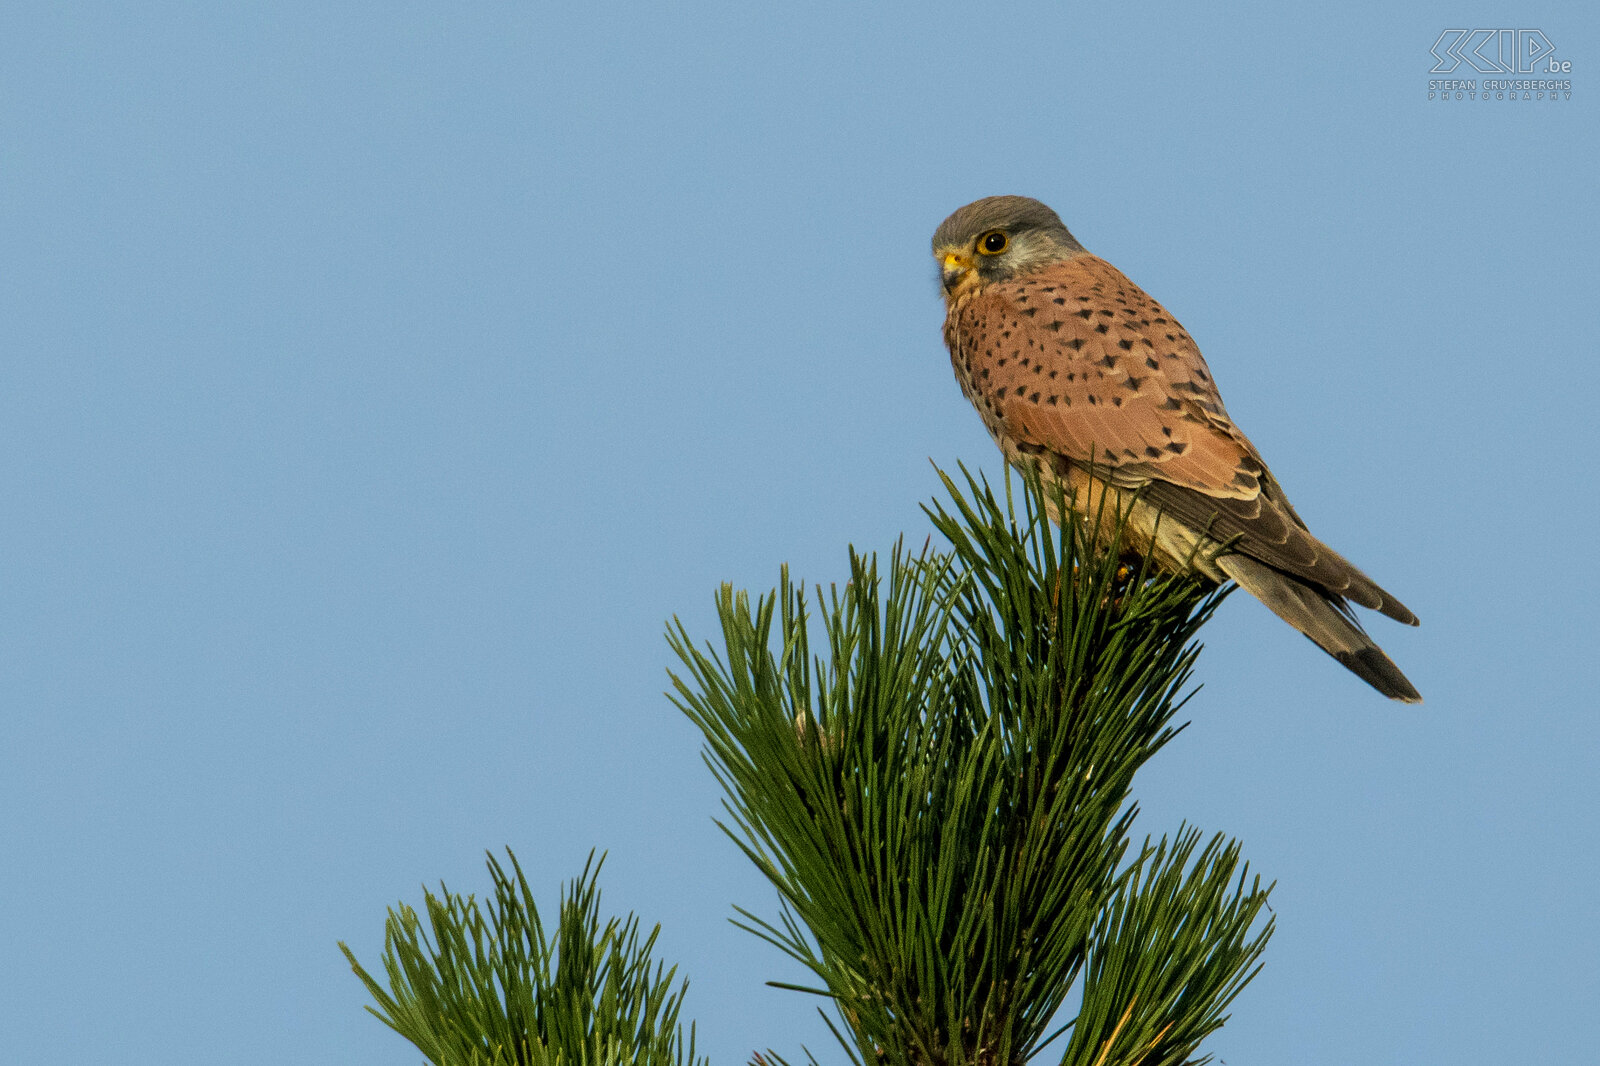 Birds of prey - Kestrel The kestrel (Falco tinnunculus) is a small bird of prey that hunts small mammals such as mice and large insects such as beetles. They live both in areas with open meadows and in forests.  Stefan Cruysberghs